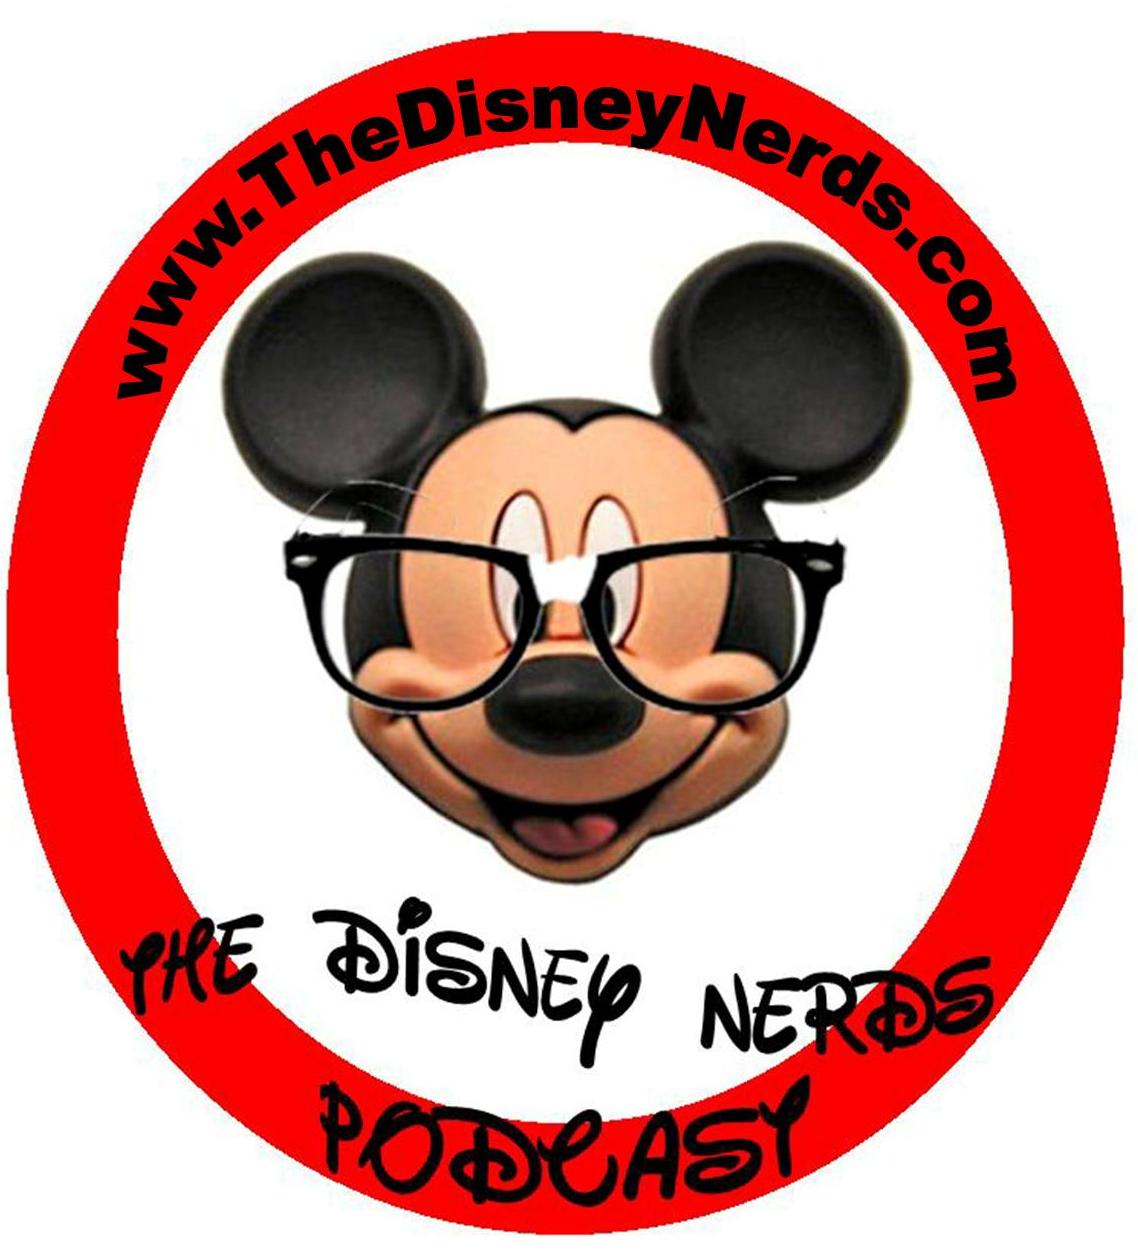 Show # 38 of the Disney Nerds Podcast